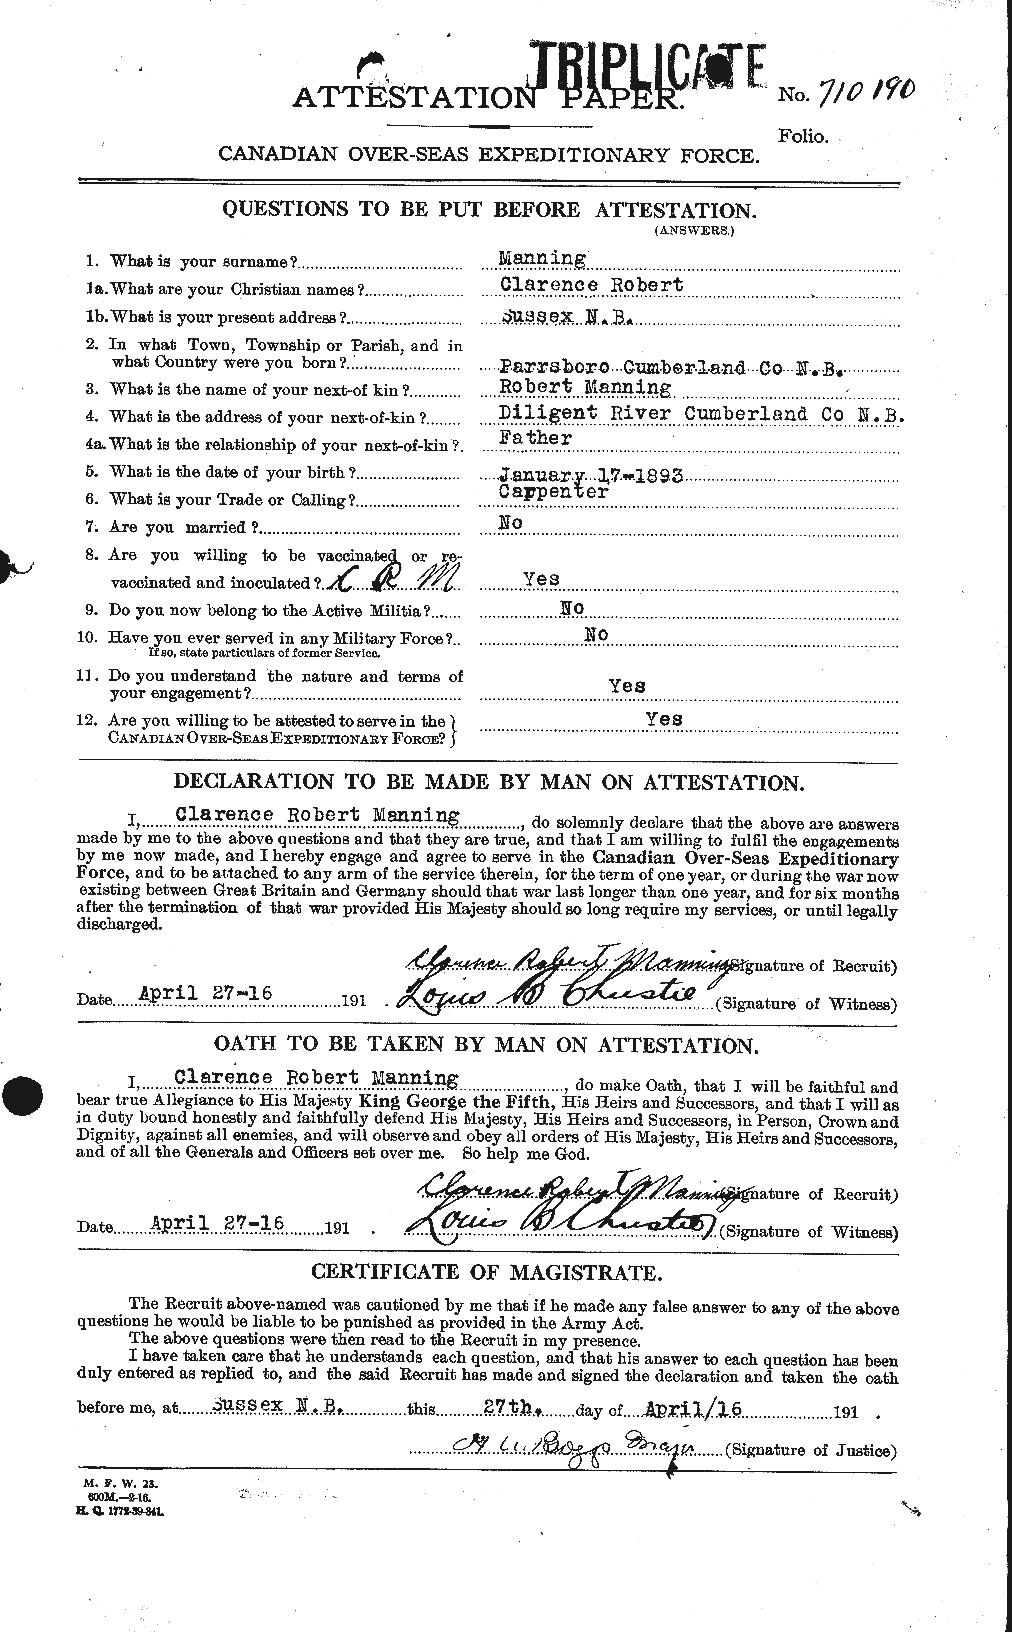 Personnel Records of the First World War - CEF 479607a